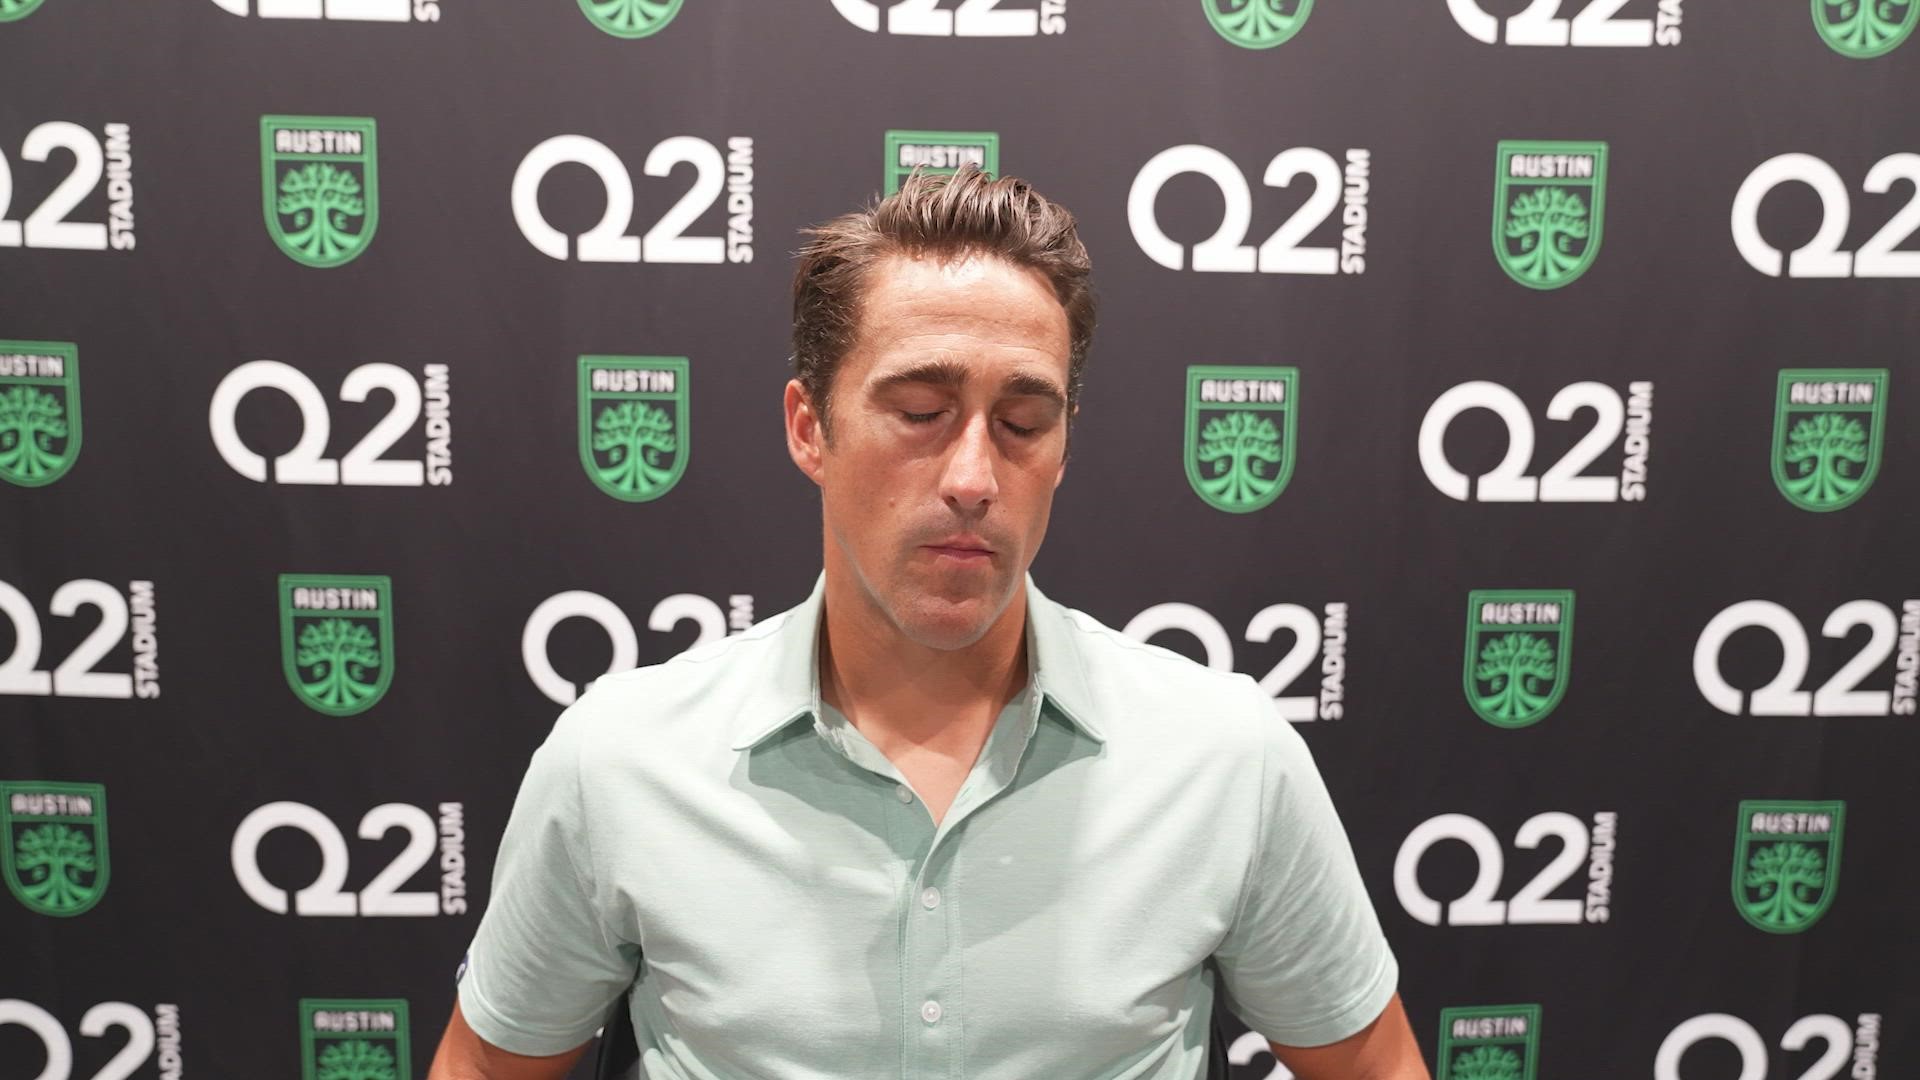 Austin FC head coach Josh Wolff speaks with the media following the club's 2-1 loss to LAFC.